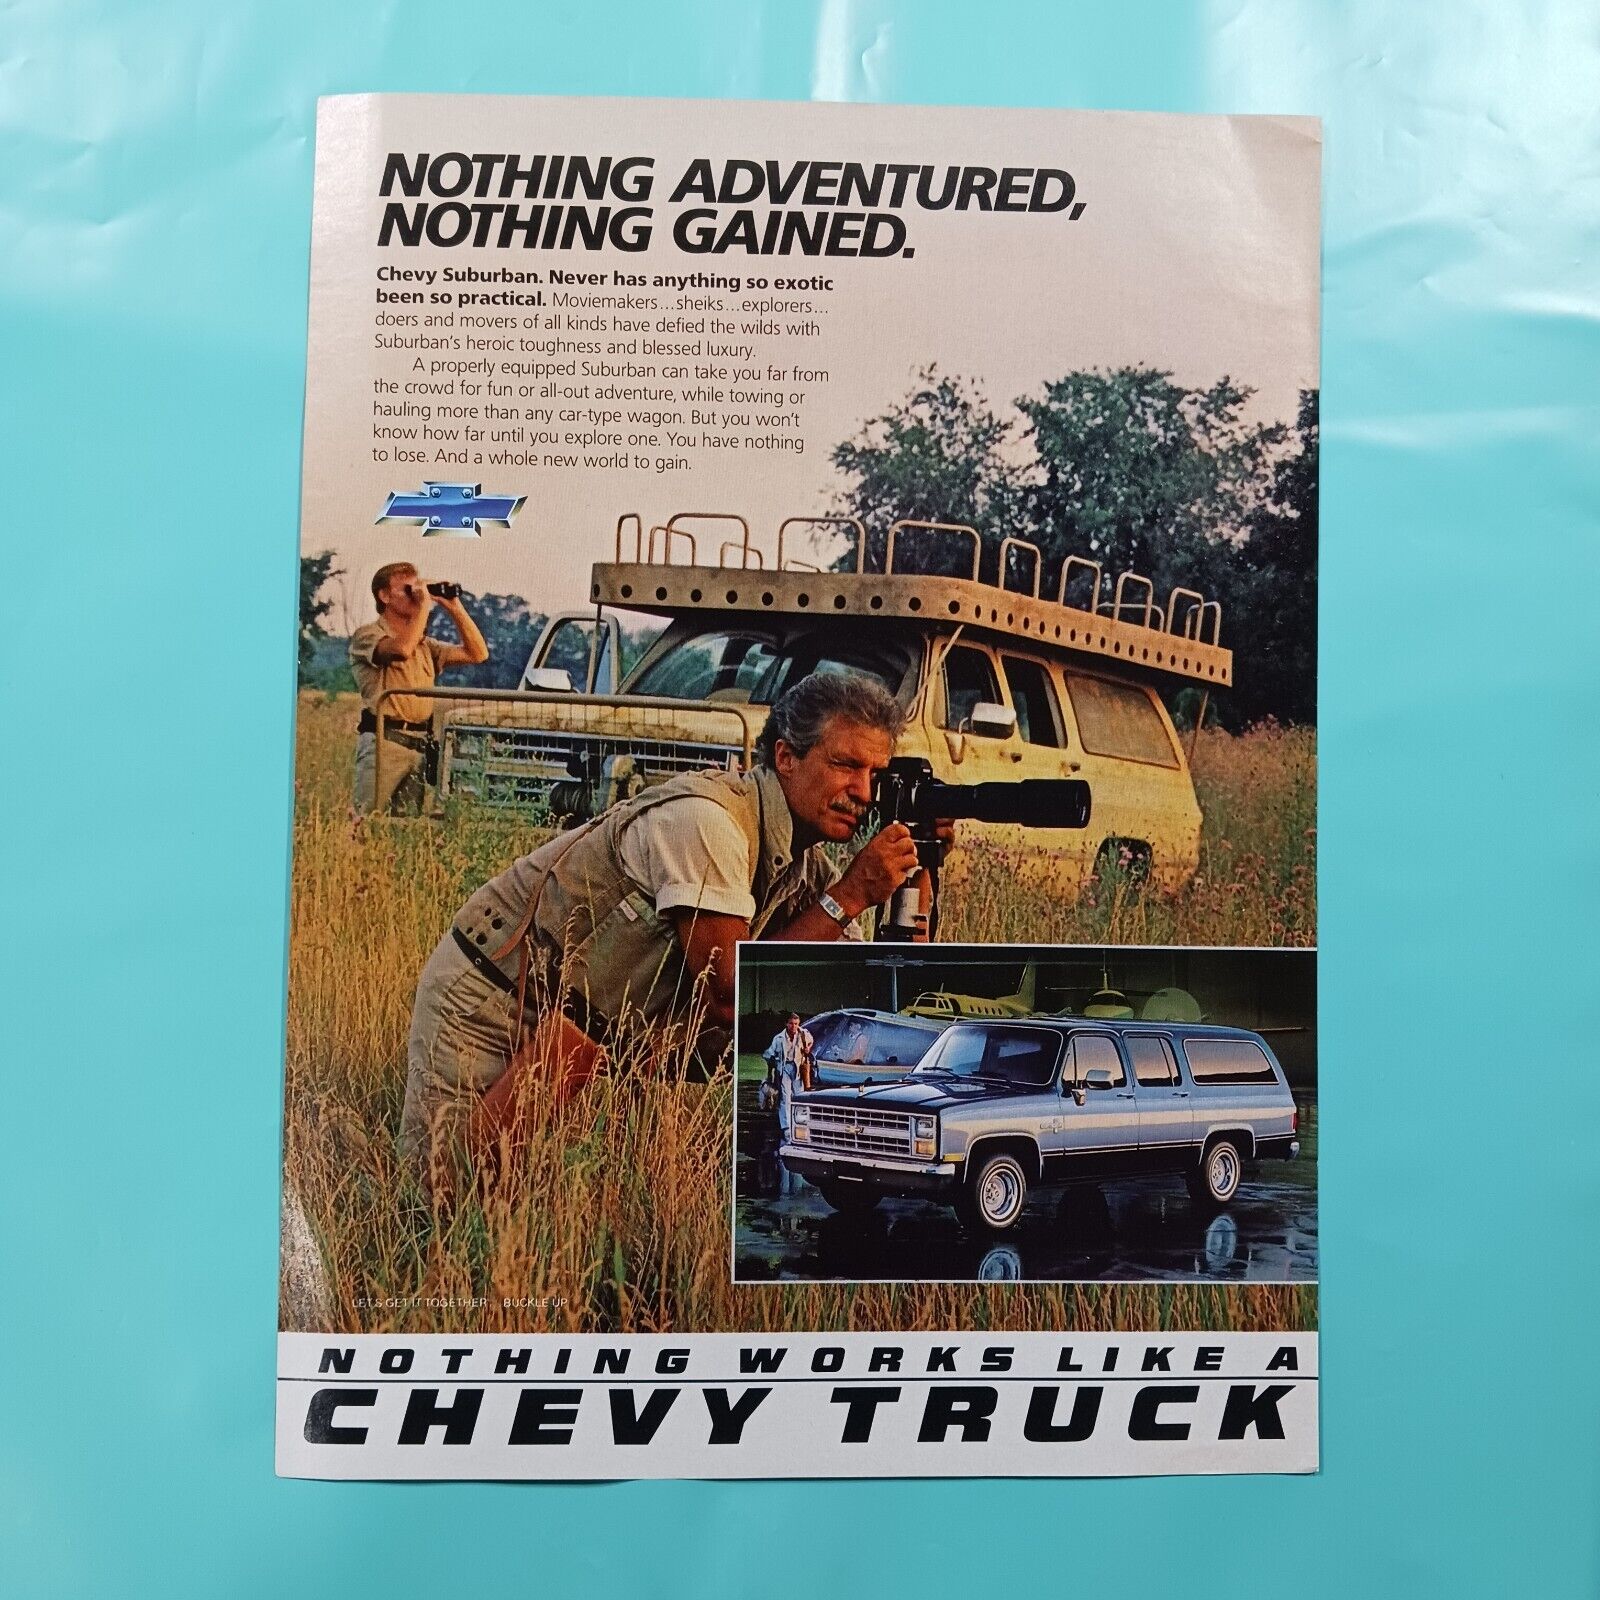 1985 VINTAGE CHEVROLET SUBURBAN NOTHING WORKS LIKE A CHEVY TRUCK PRINT AD